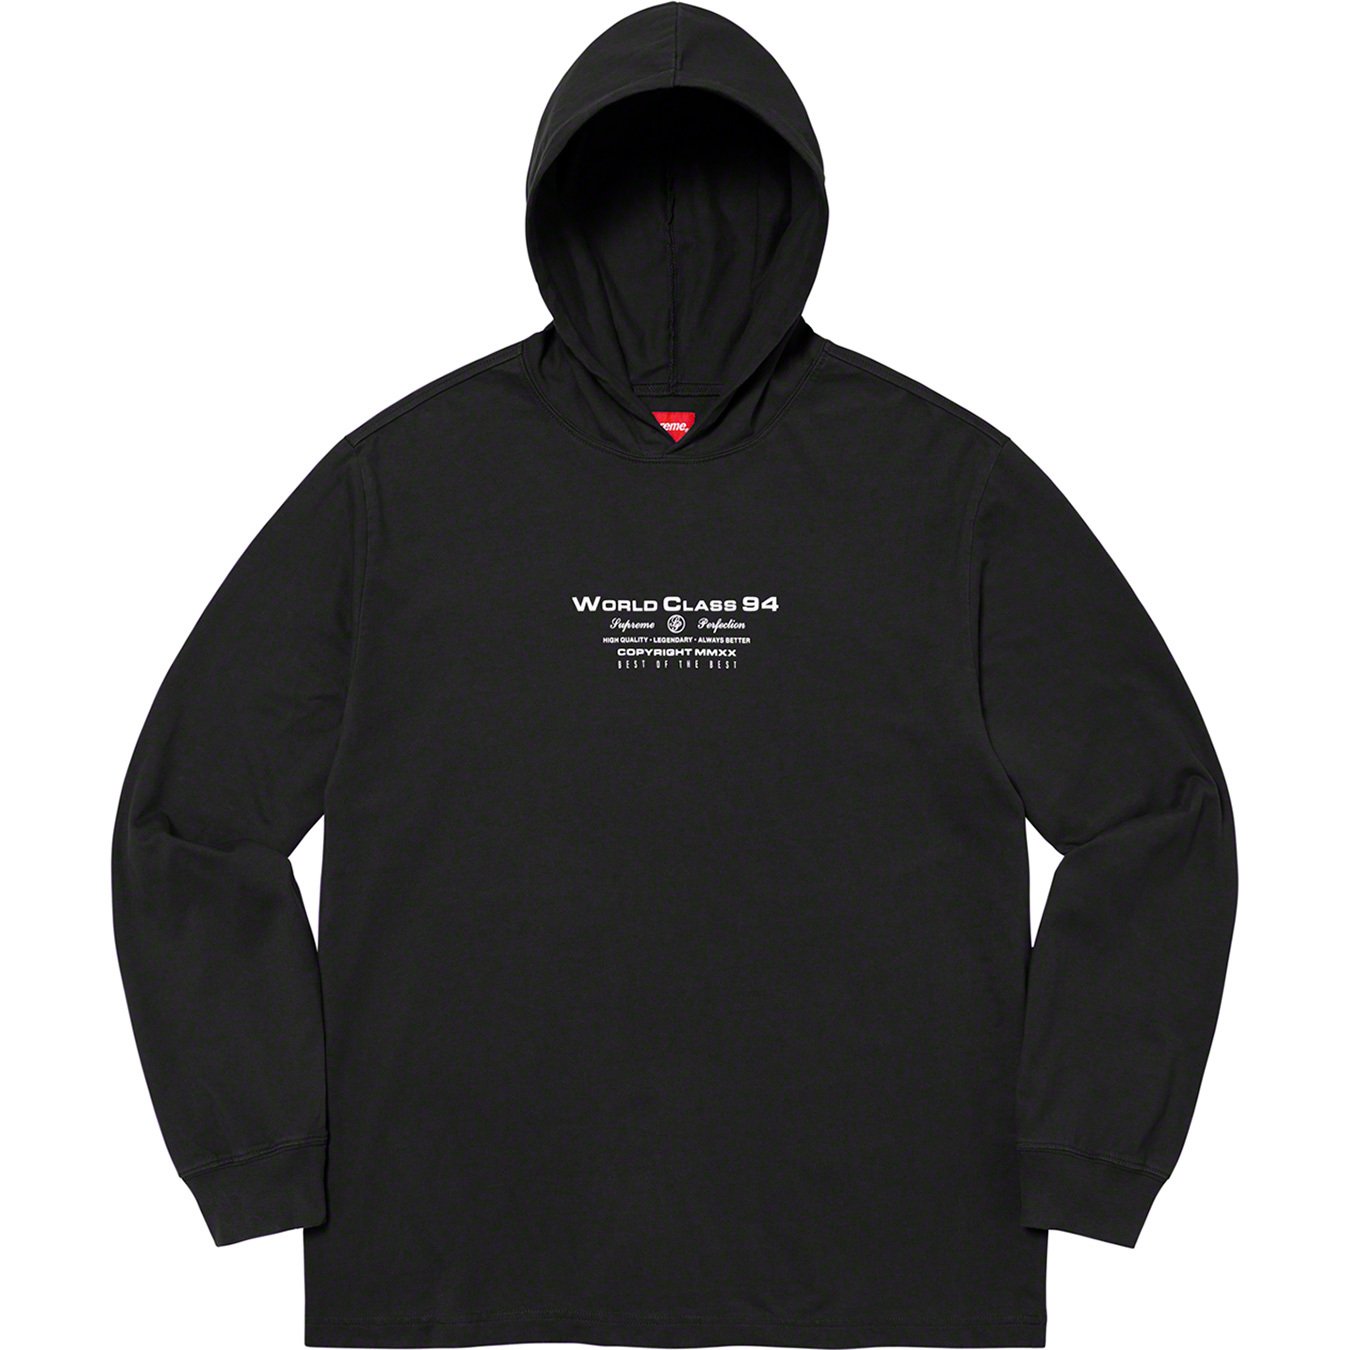 Best Of The Best Hooded L S Top - fall winter 2020 - Supreme